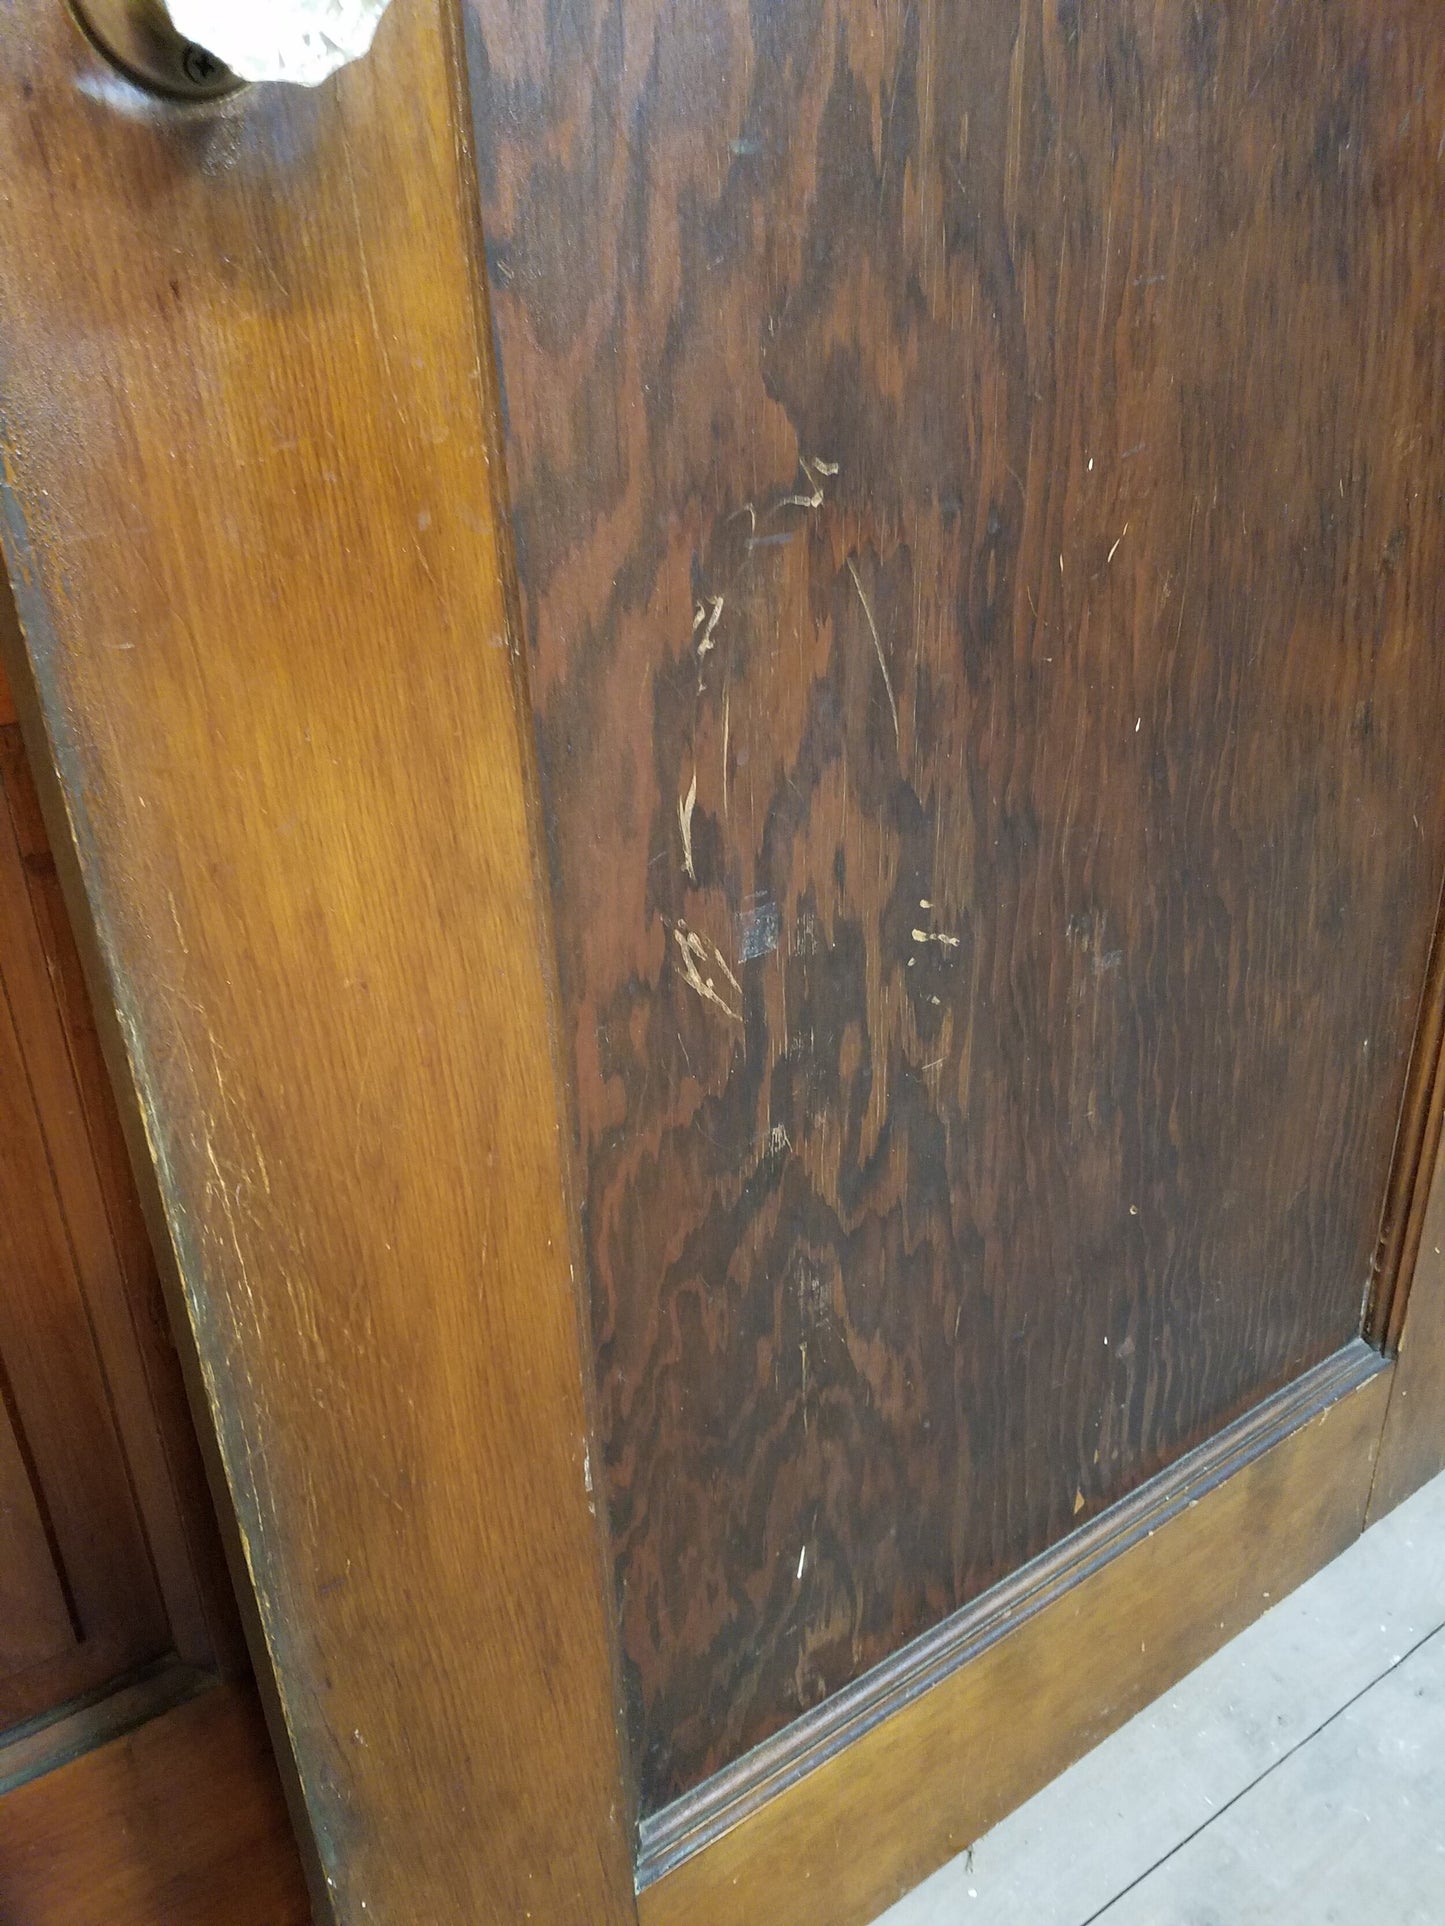 Craftsman or Mission Style Glass and Wood Front Door, Vintage Craftsman Style Entry Door